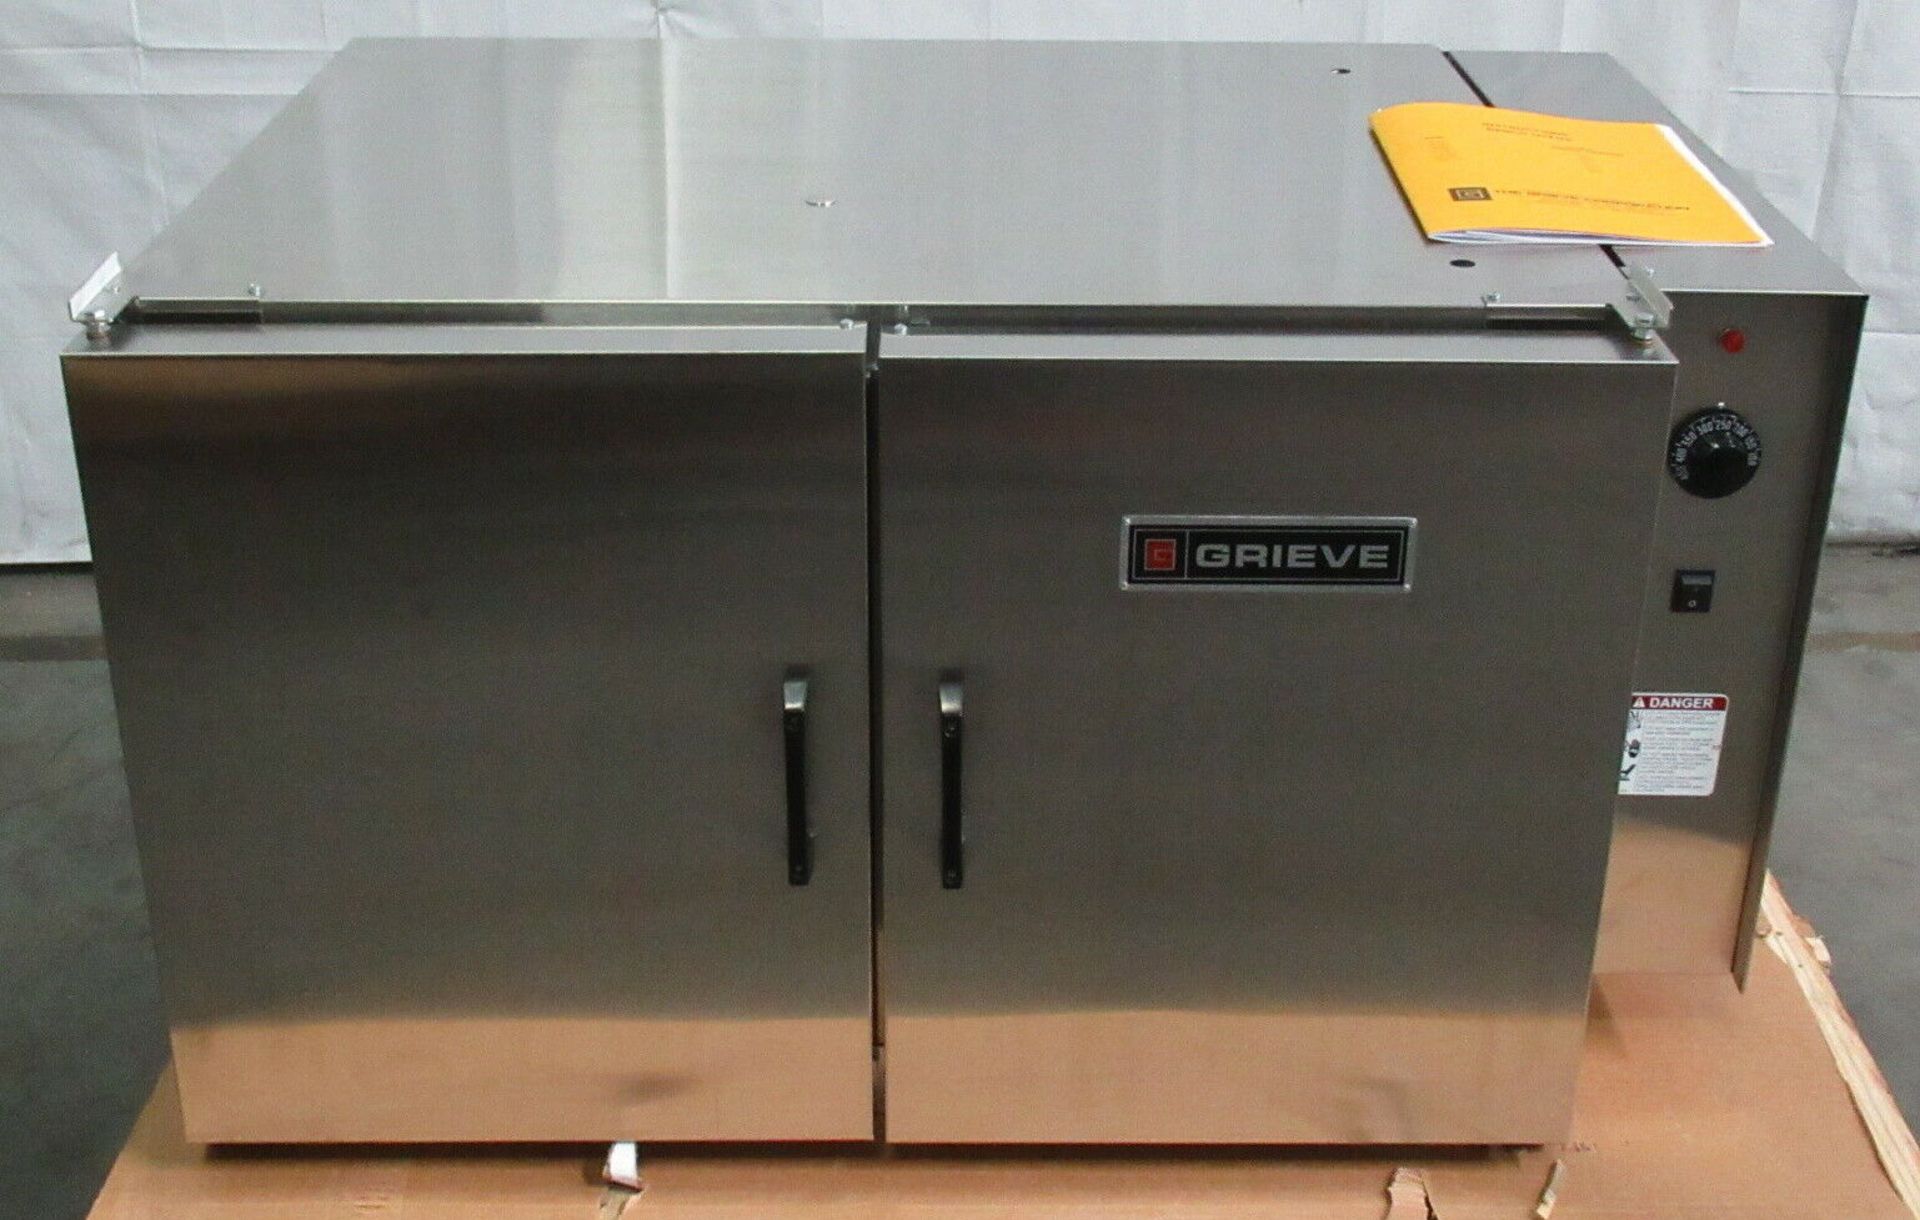 Grieve NB-350 Forced Convection Bench Oven 350?F Max - Gilroy